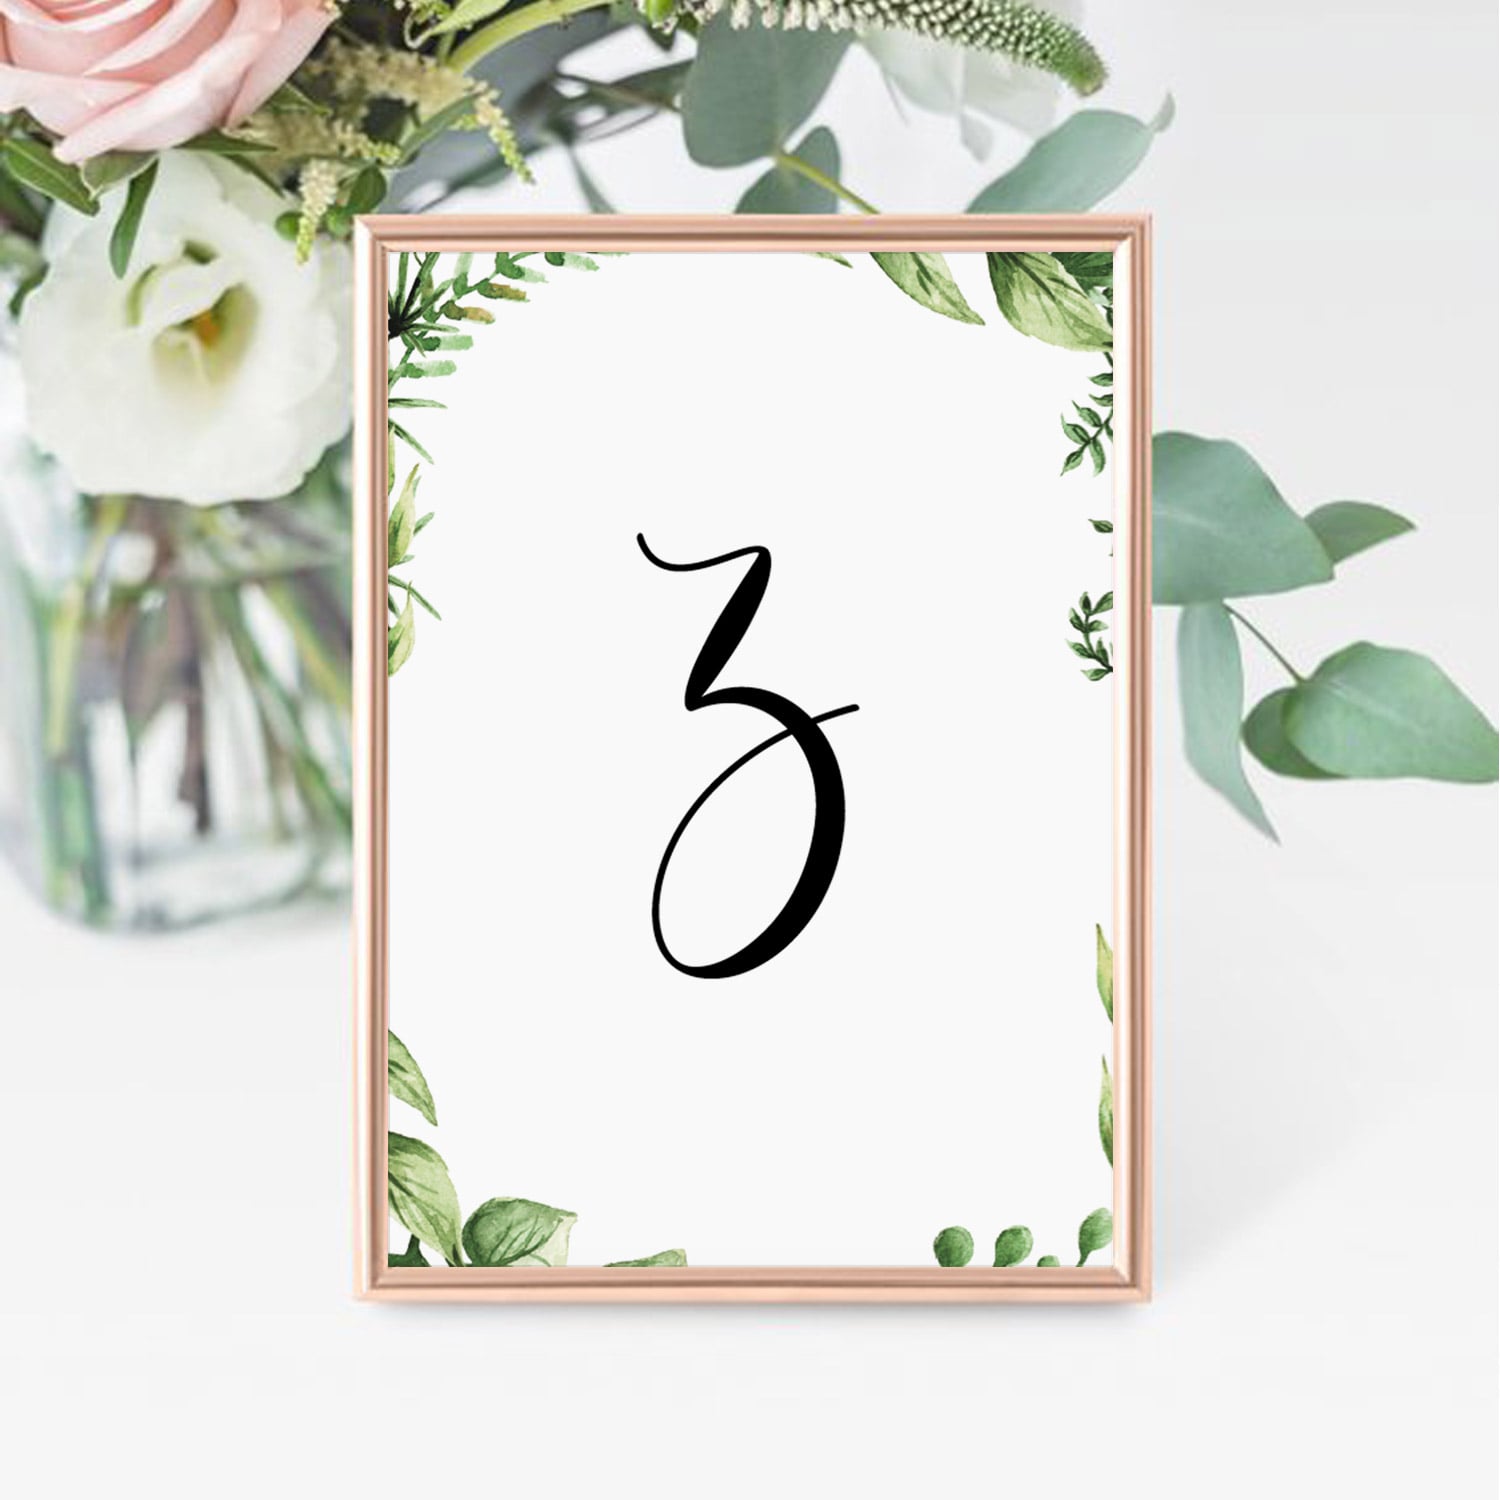 Greenery table number cards printable by LittleSizzle